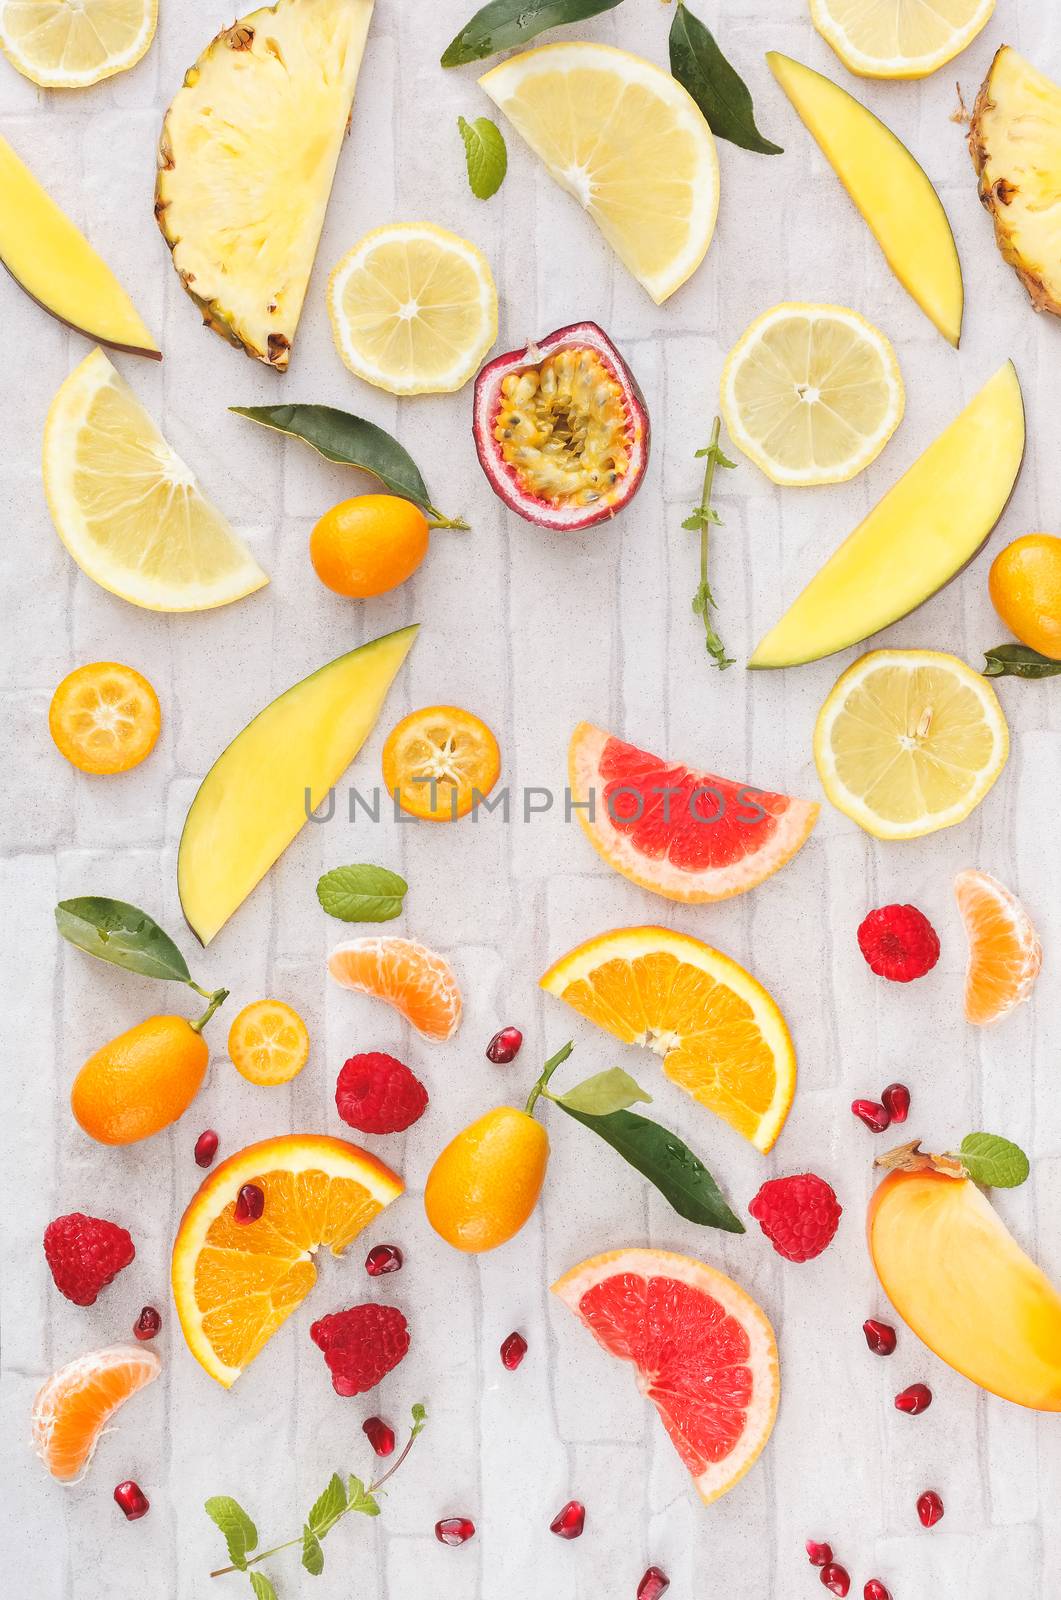 Collection of fresh whole and sliced yellow, orange and red fruits by Slast20